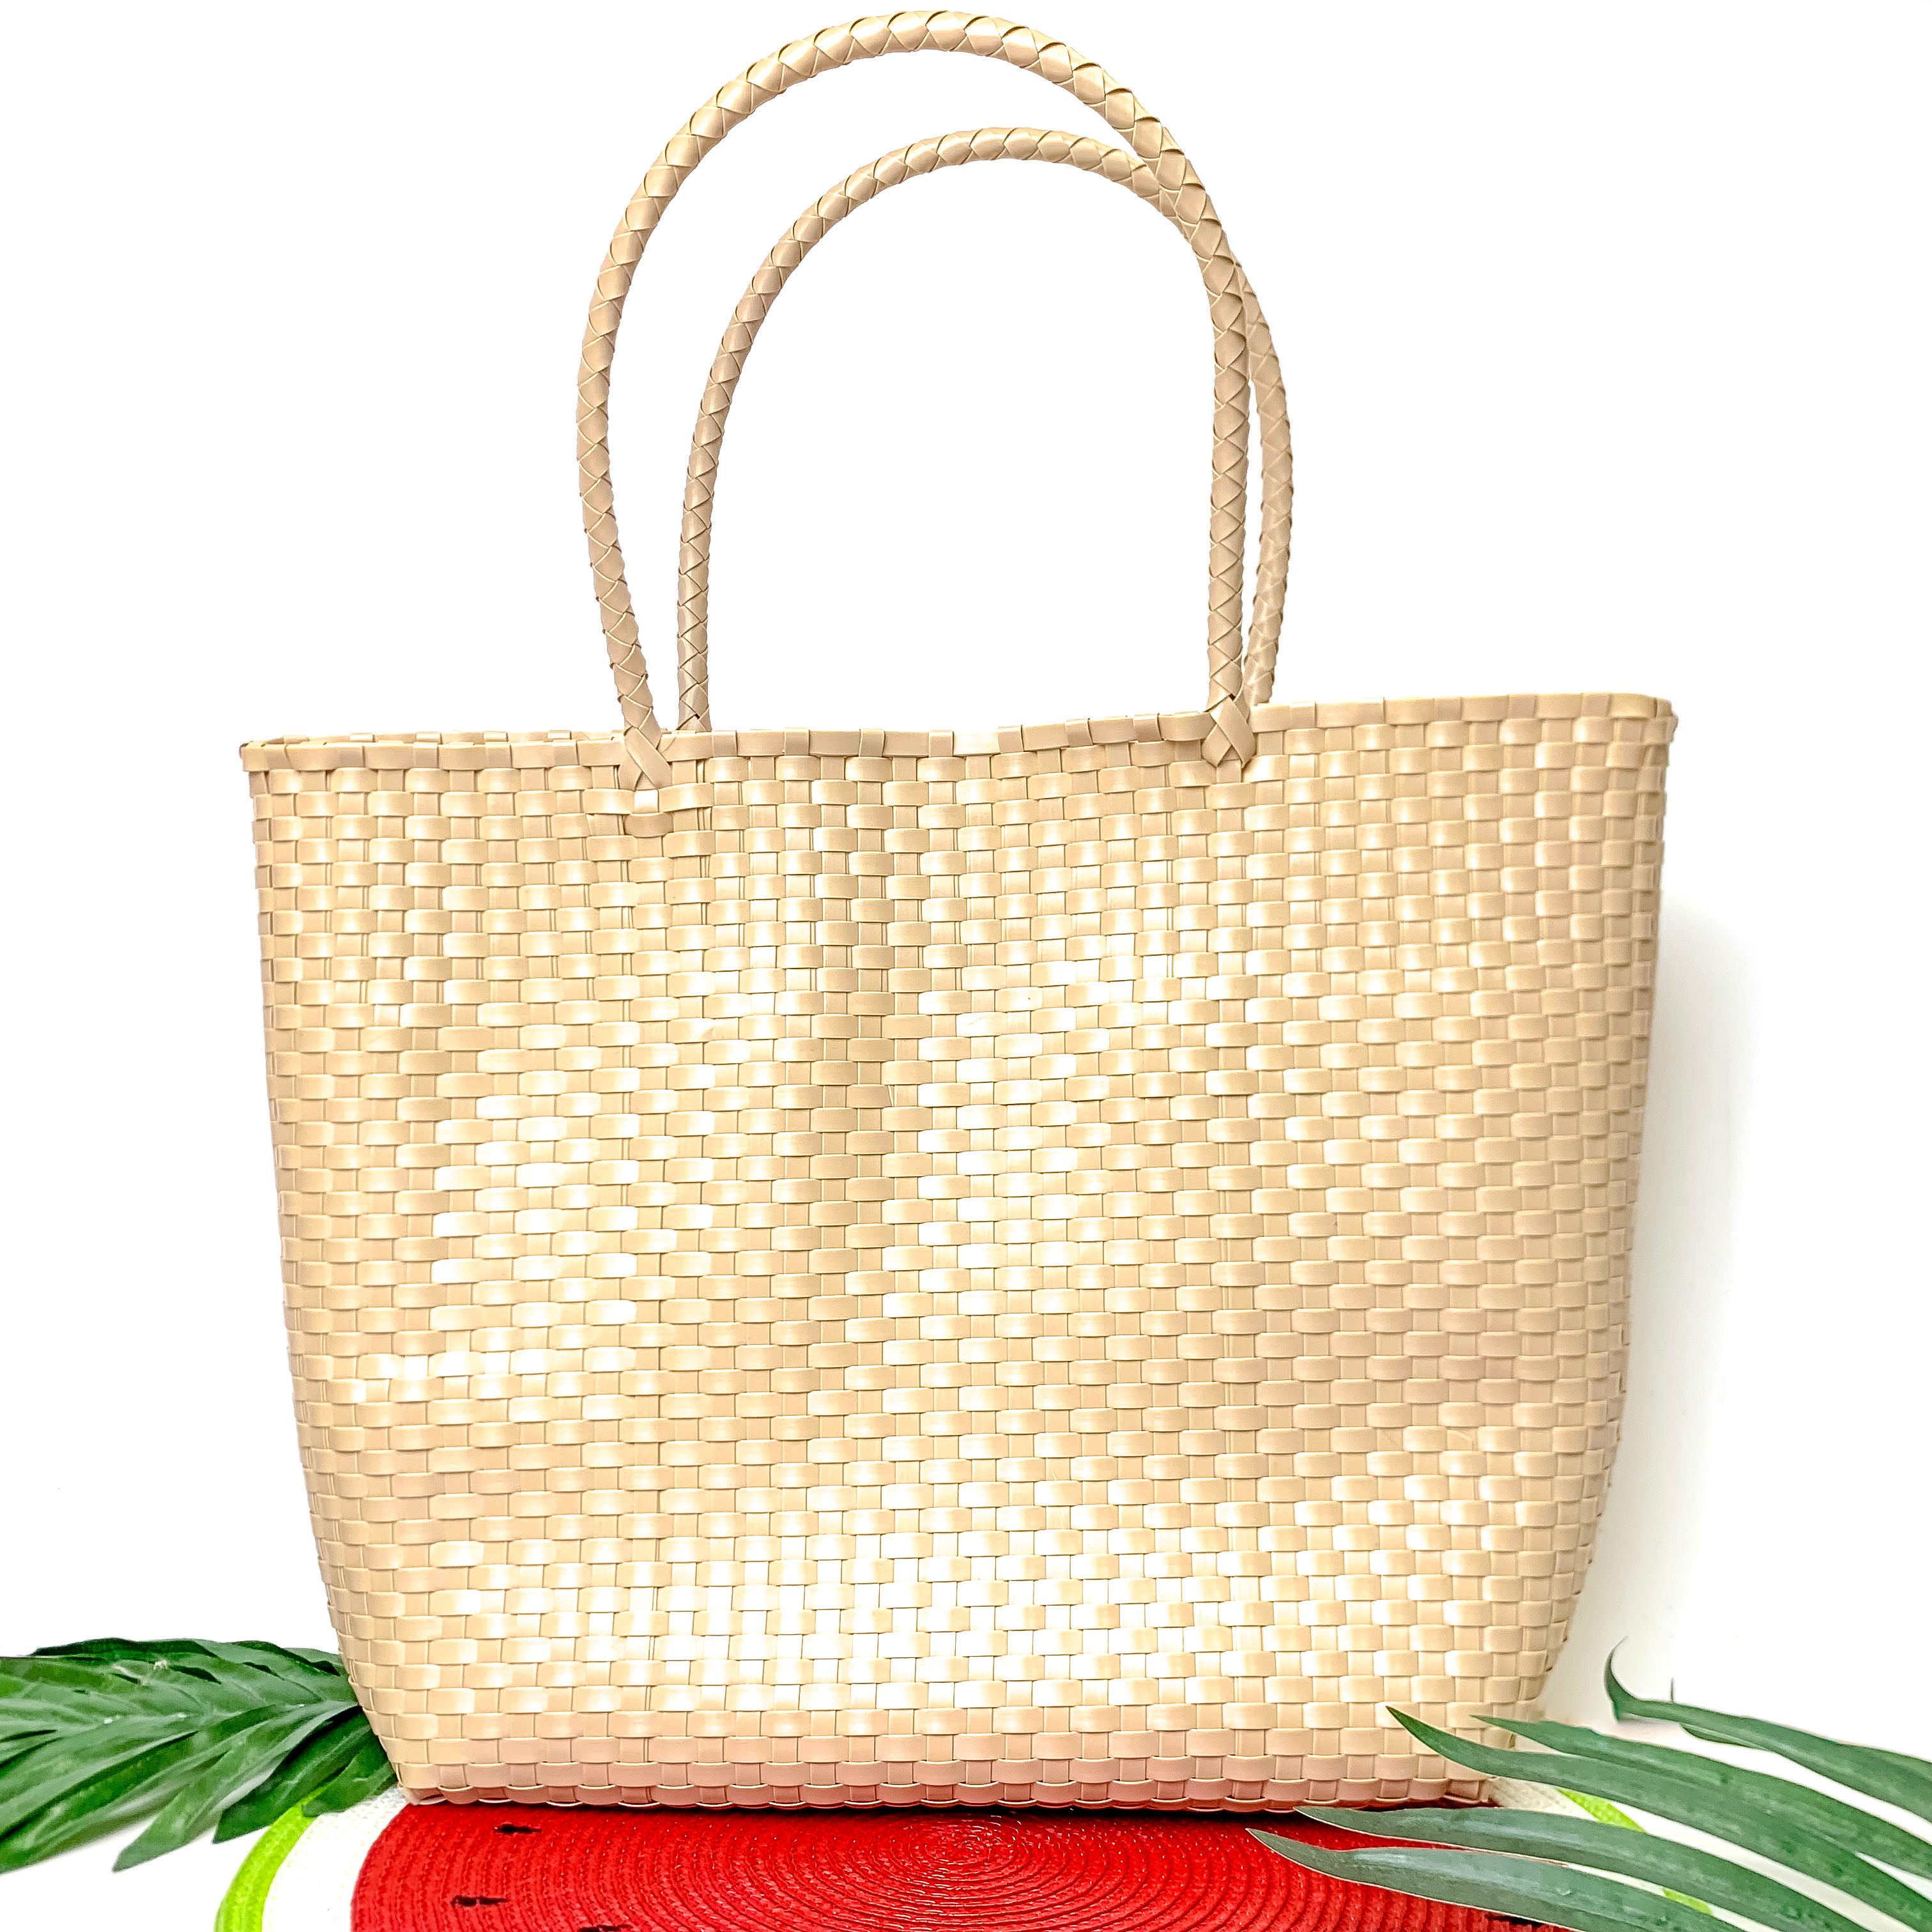 Coastal Couture Carryall Tote Bag in Beige - Giddy Up Glamour Boutique